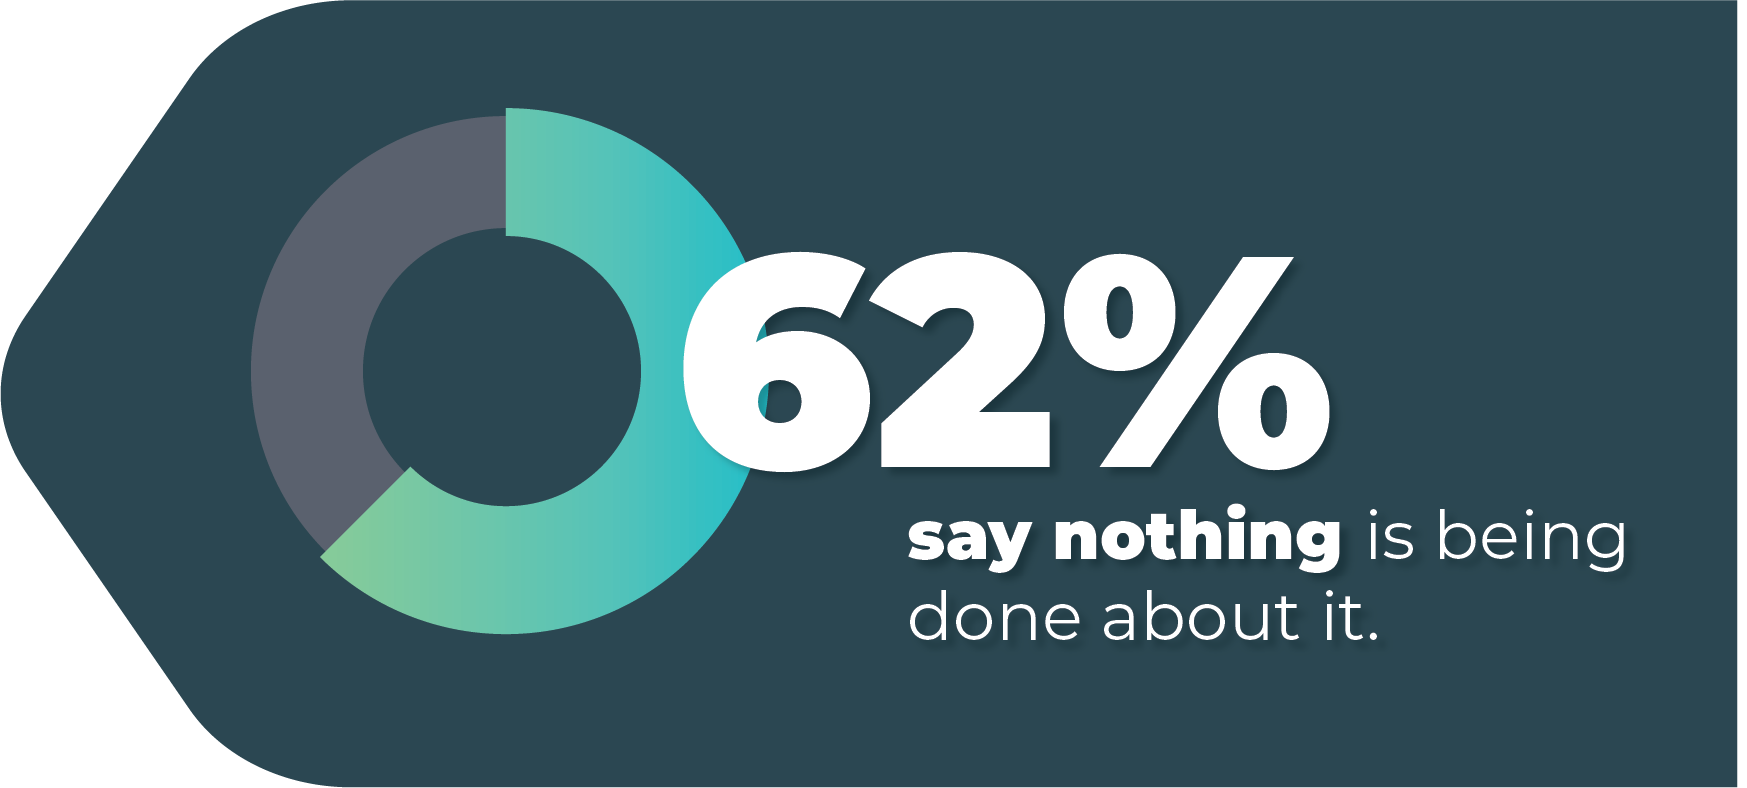 62% say nothing is being done about it. 